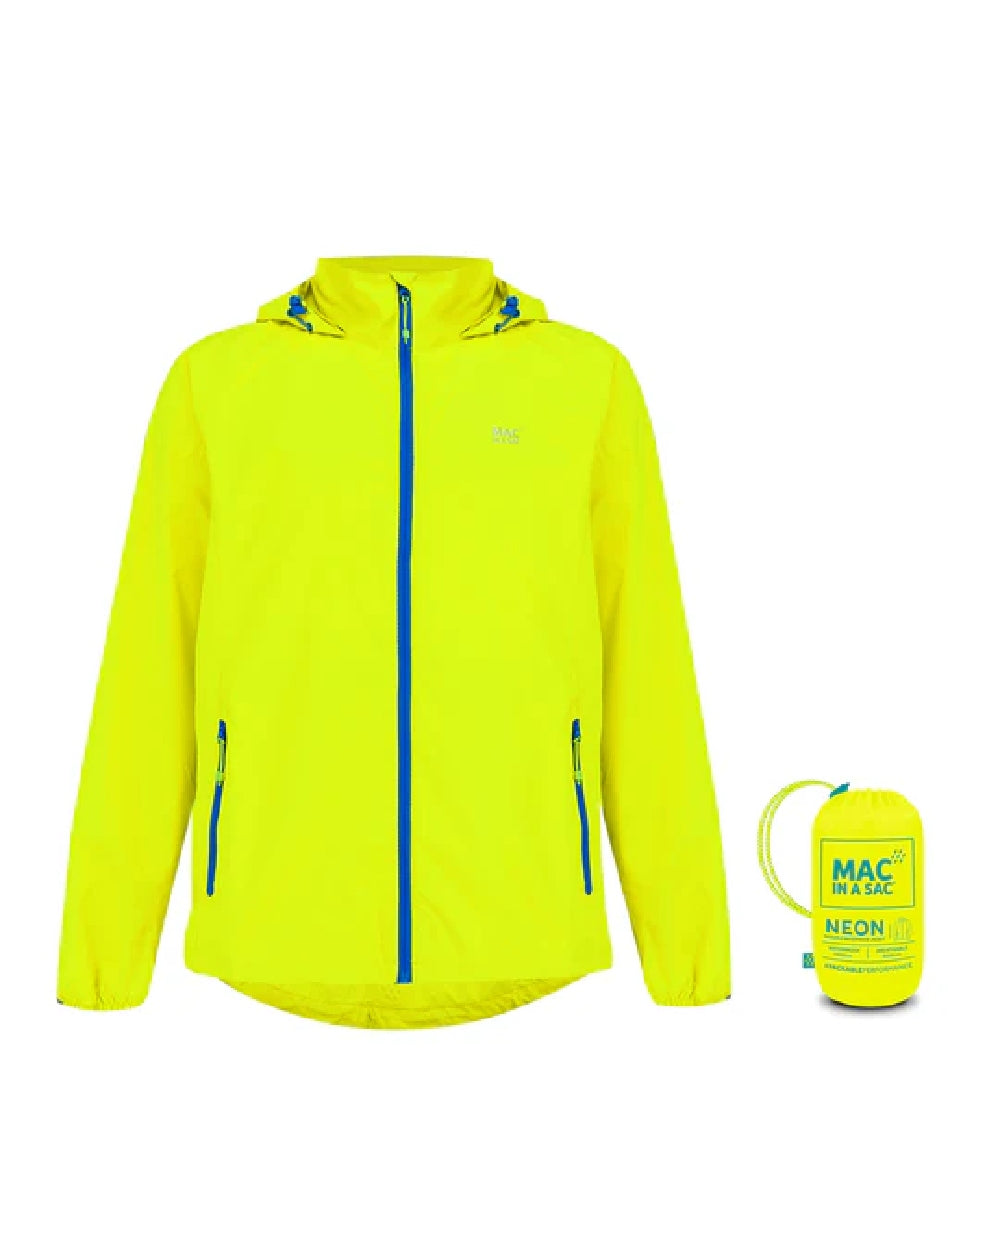 Neon Yellow coloured Mac In A Sac Packable Origin Neon Waterproof Jacket on white background 